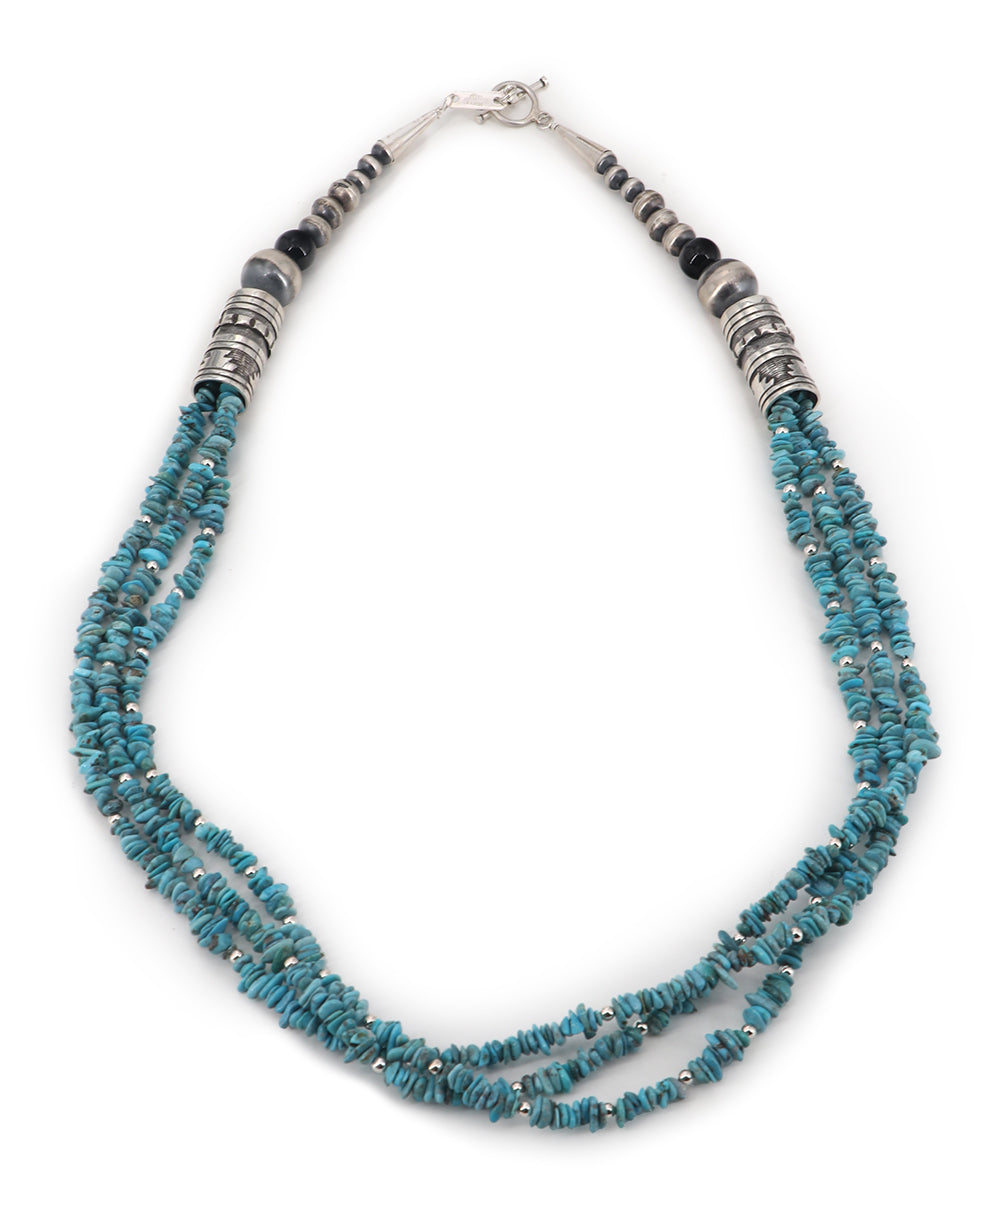 Triple-strand turquoise chip and sterling silver bead necklace showcasing a tribal-inspired designTriple-strand turquoise chip and sterling silver bead necklace showcasing a tribal-inspired design